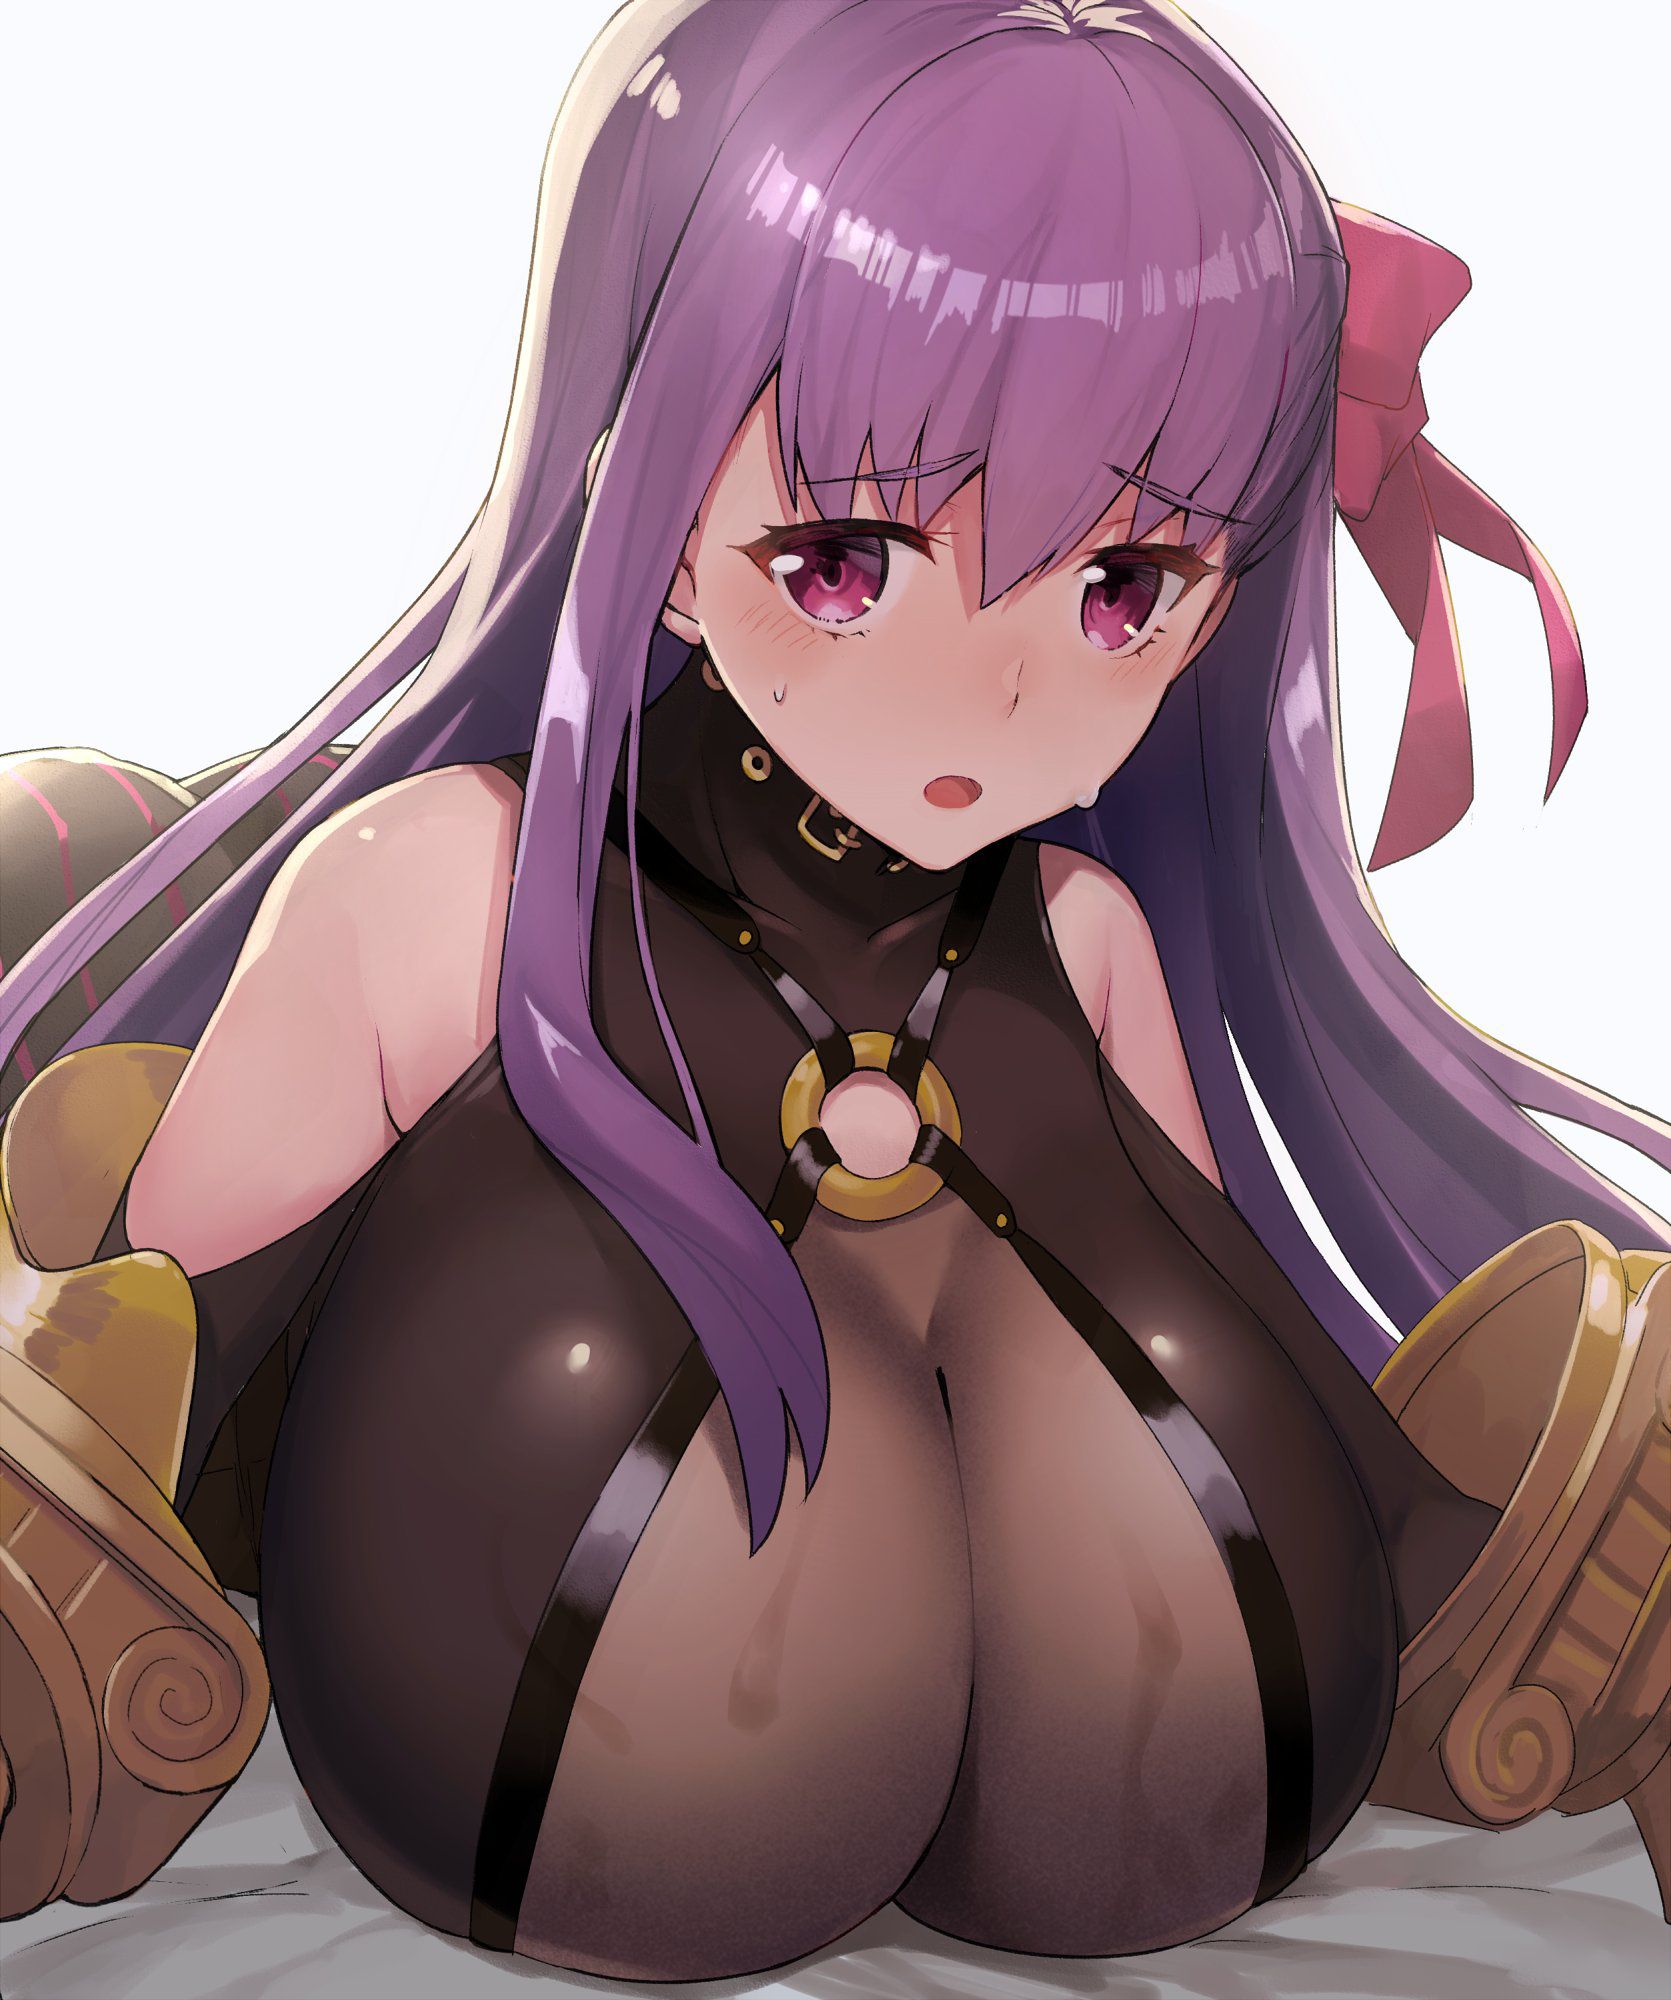 I collected the Onaneta image of Busty!! 10